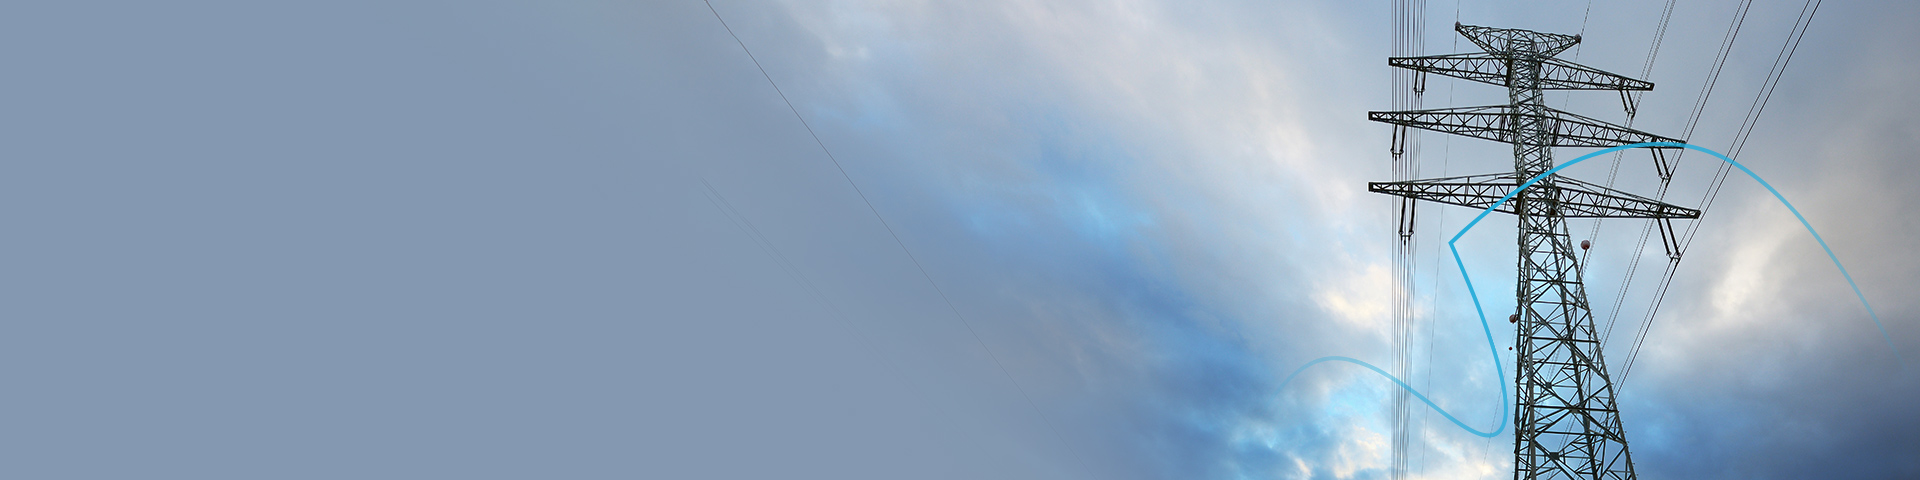 4340-HydroOne-Web-Banner-1920x480-1-1